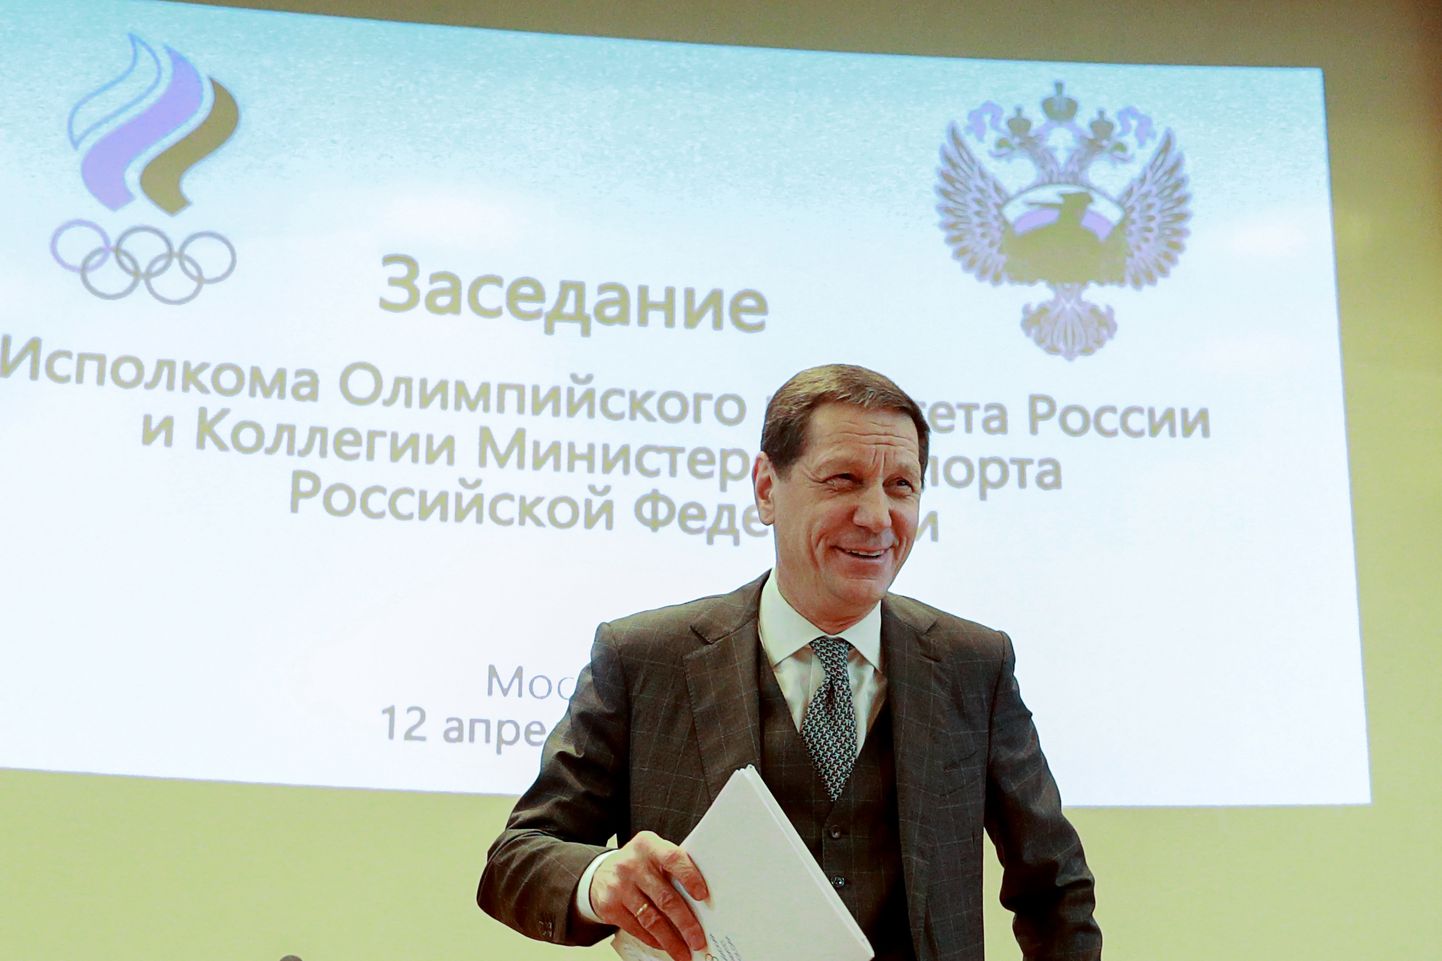 5474818 12.04.2018 President of the Russian Olympic Committee Alexander Zhukov at a meeting of the Russian Olympic Committee's executive committee. Anton Denisov / Sputnik